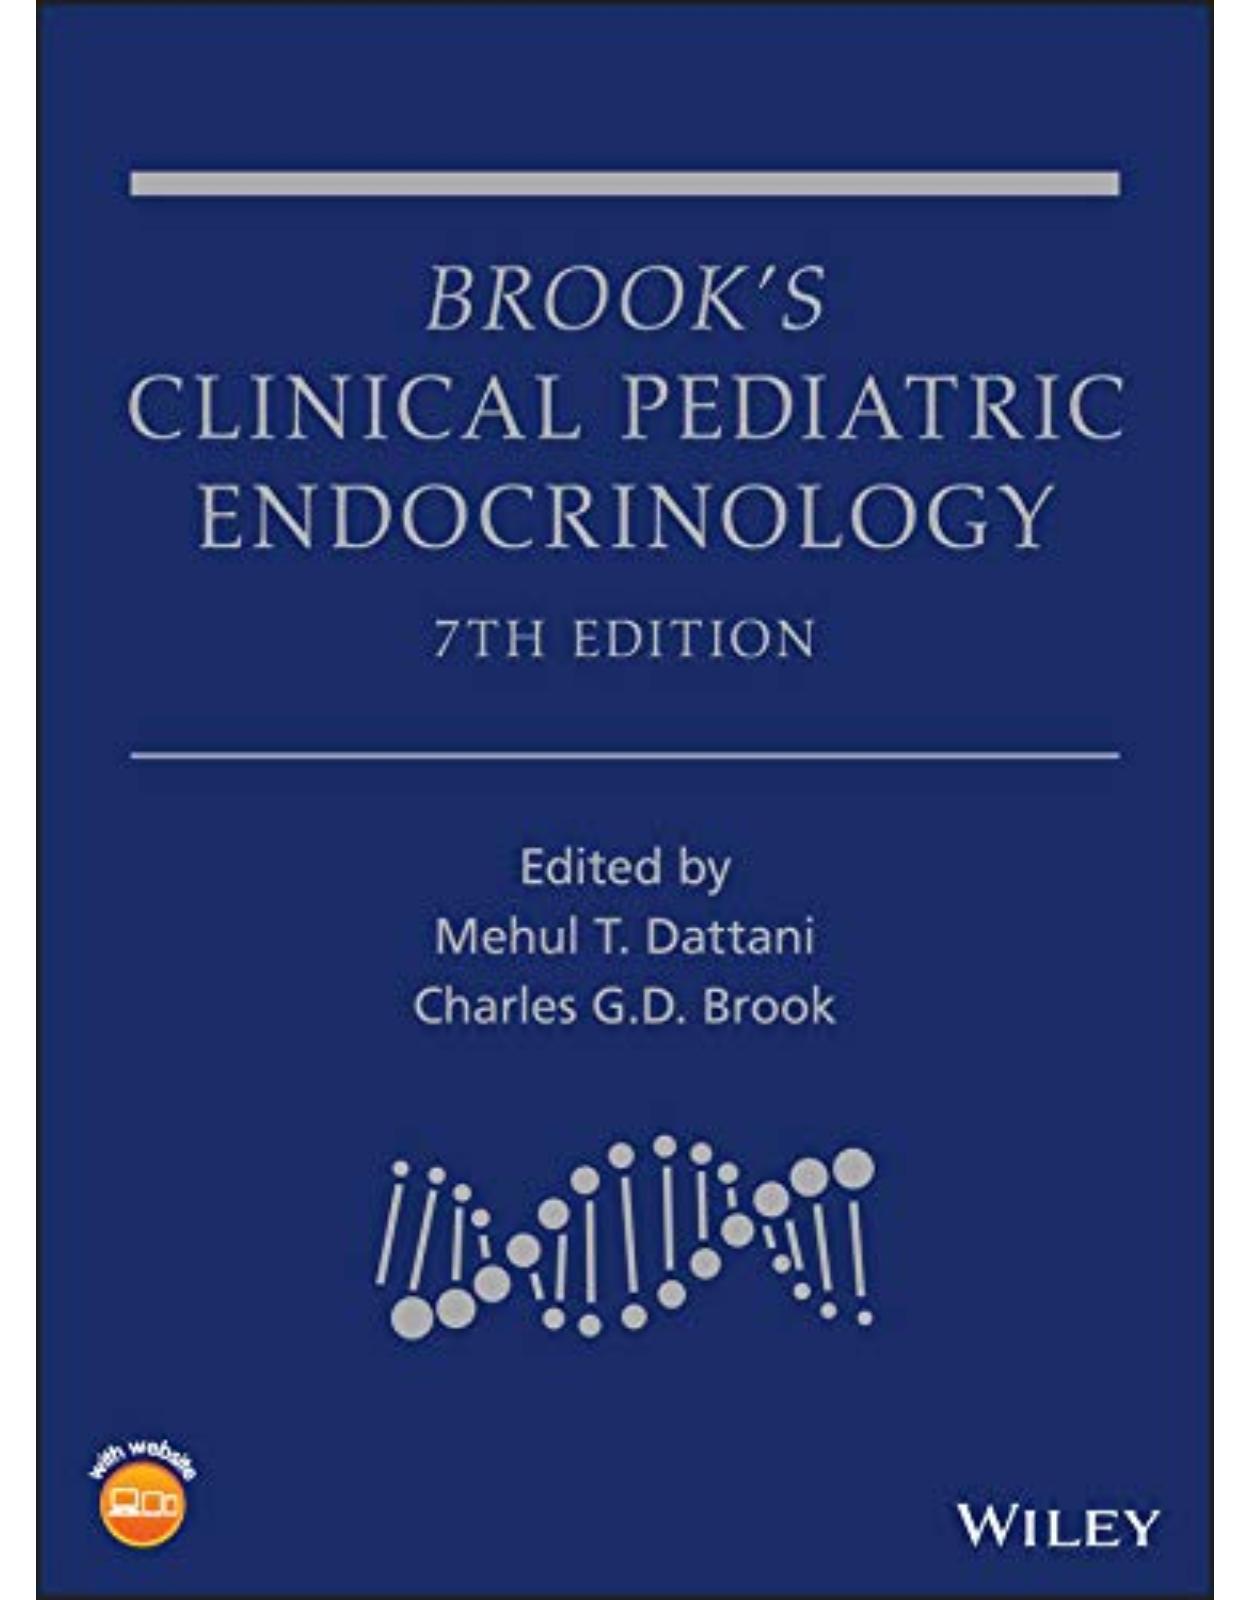 Brook's Clinical Pediatric Endocrinology, 7th Edition